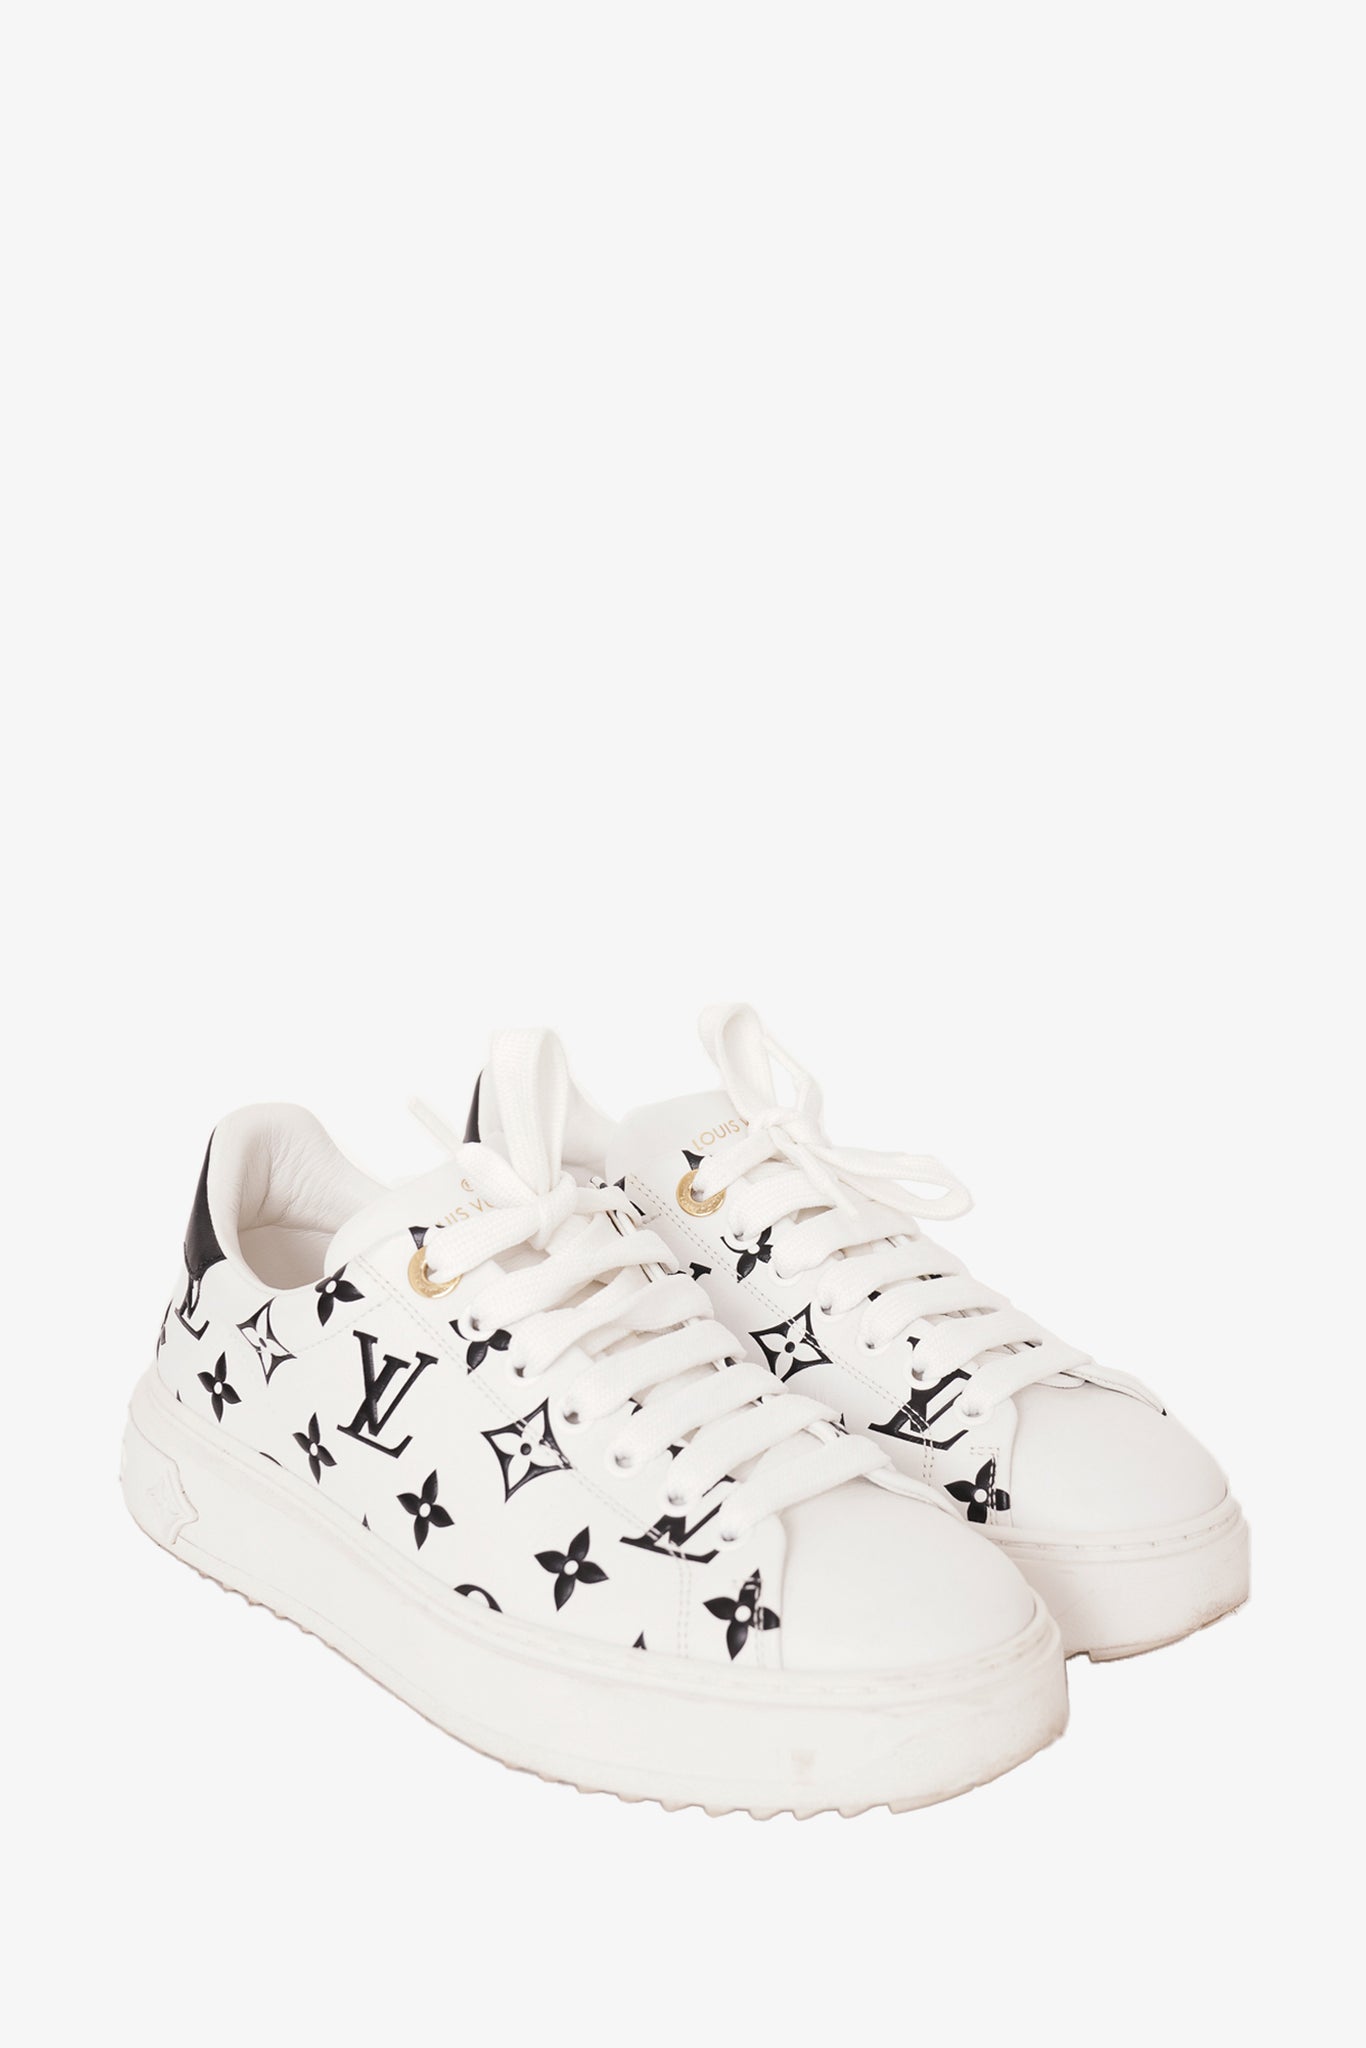 Used Louis Vuitton Timeout Low Top Sneakers Size 8 / IT 38.5